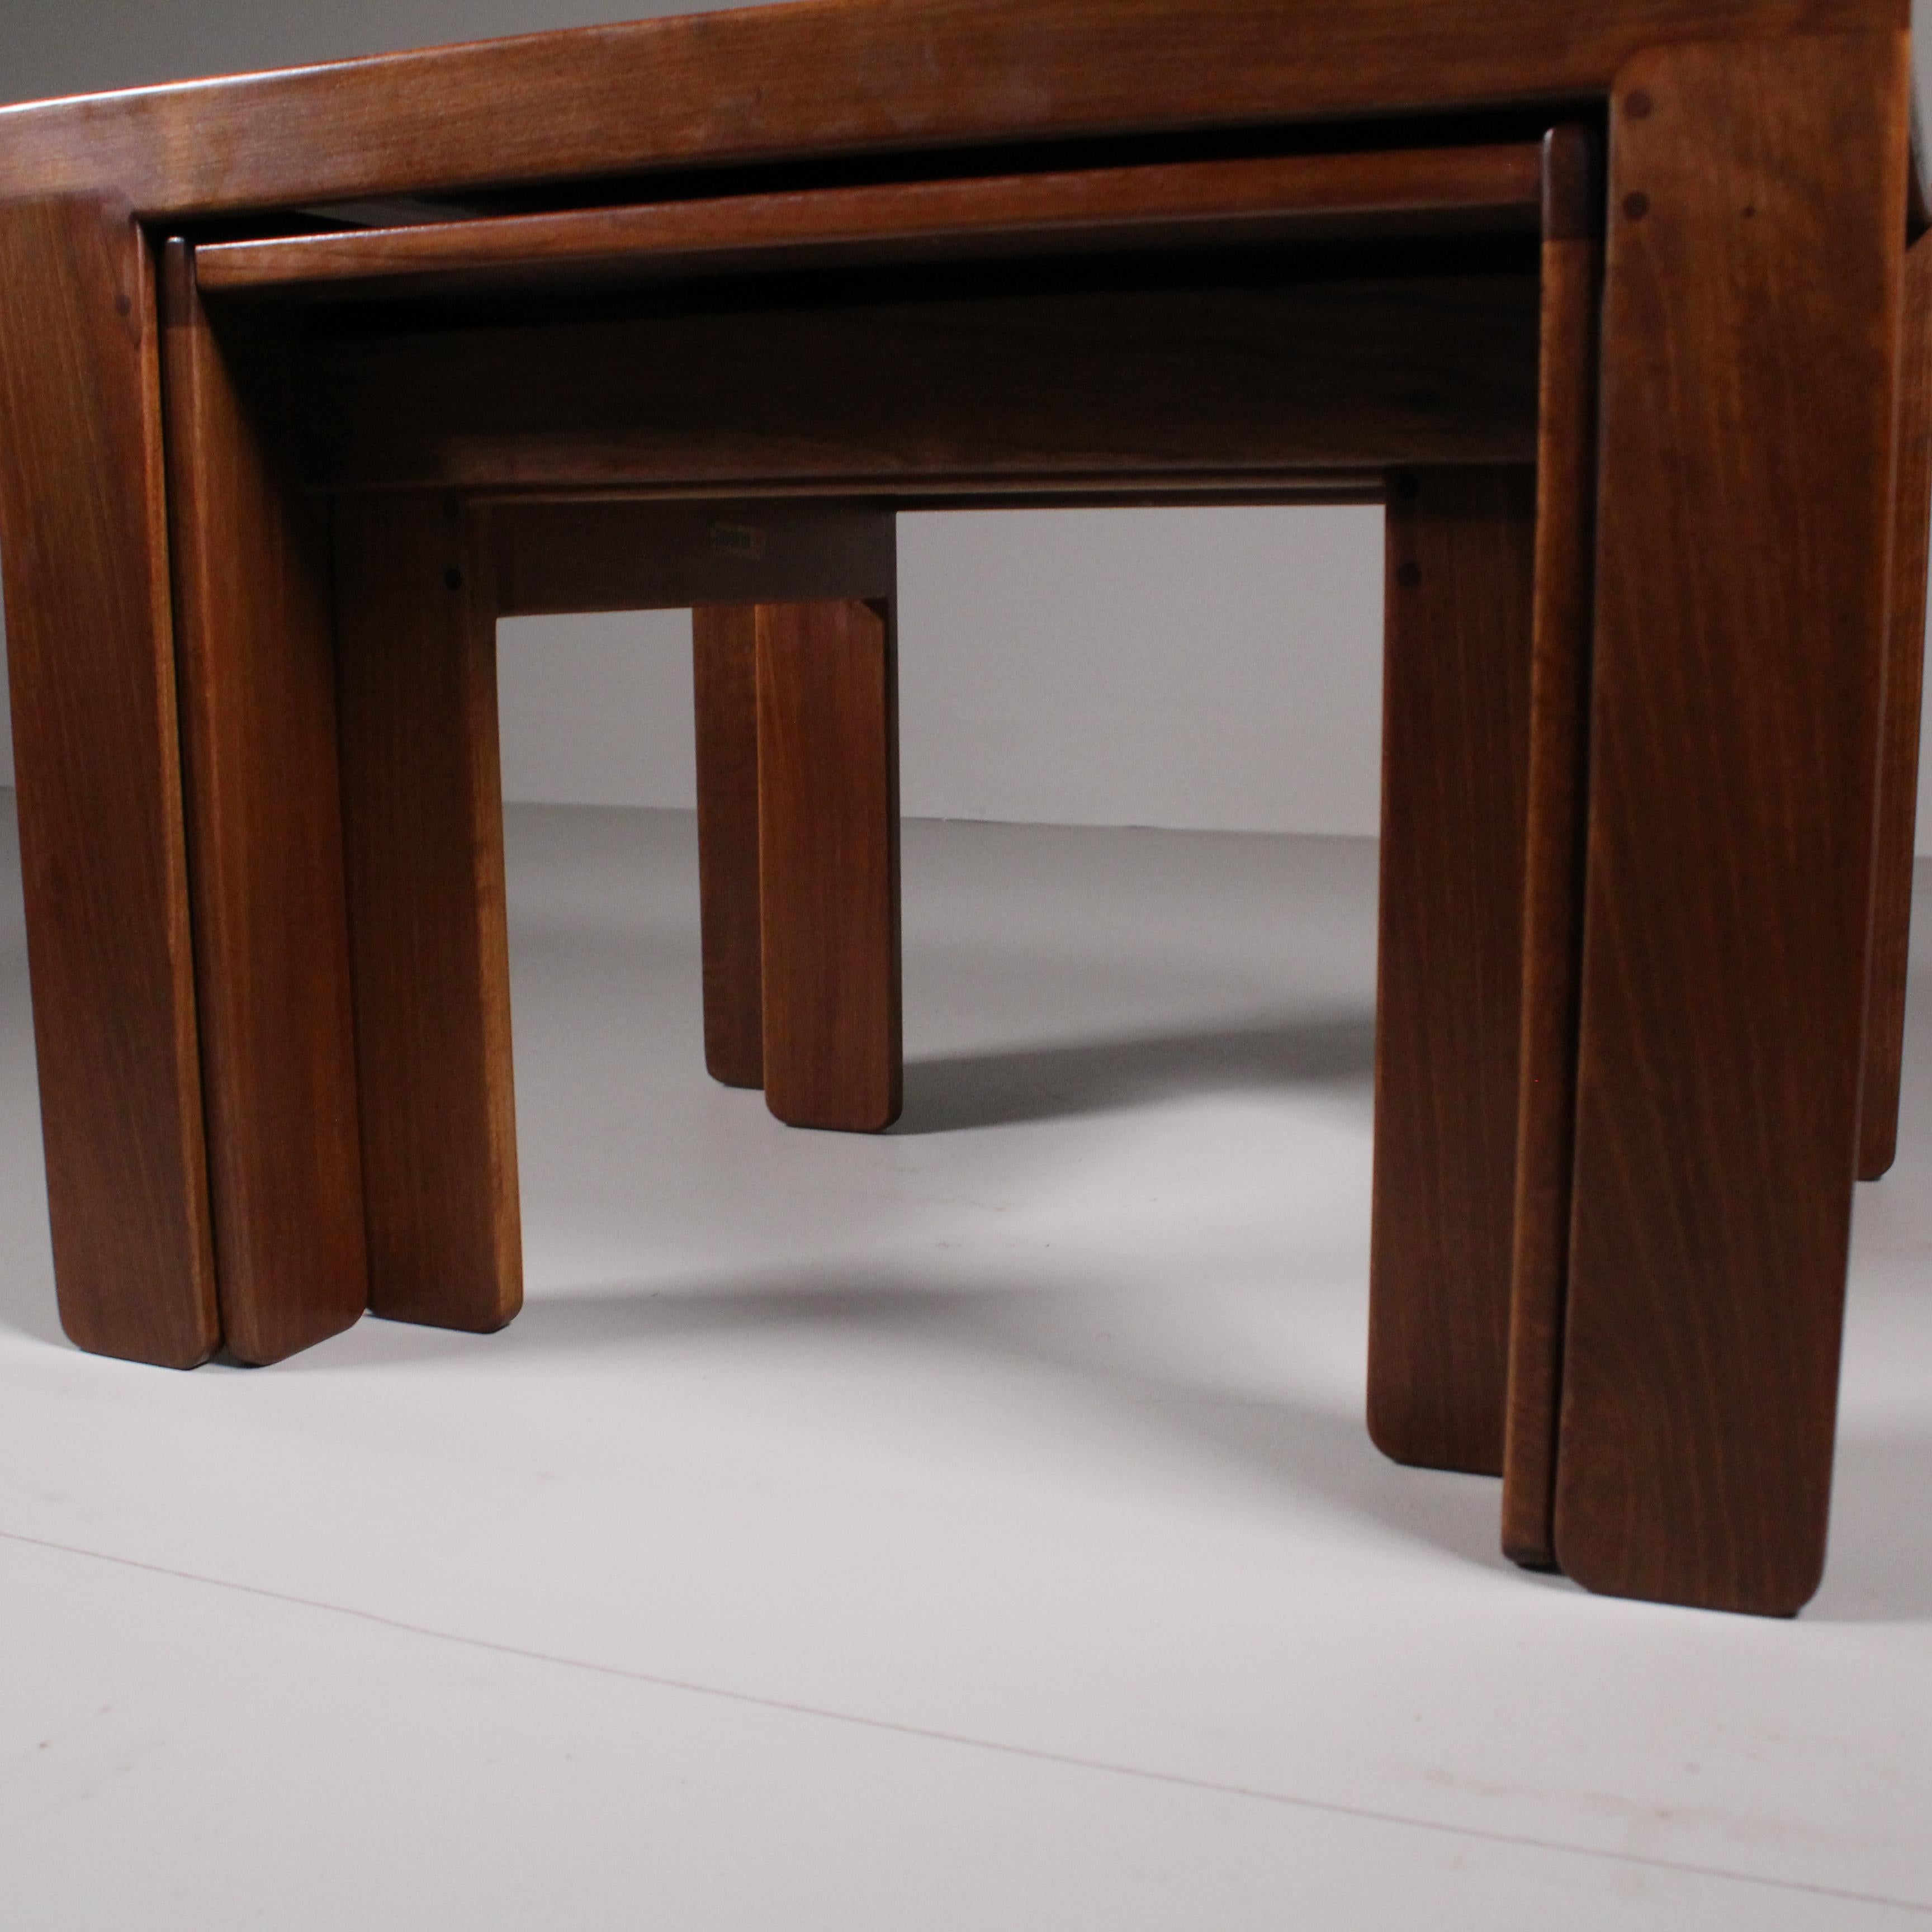 Small tables model 777, Afra and Tobia Scarpa, 1965 Circa For Sale 3